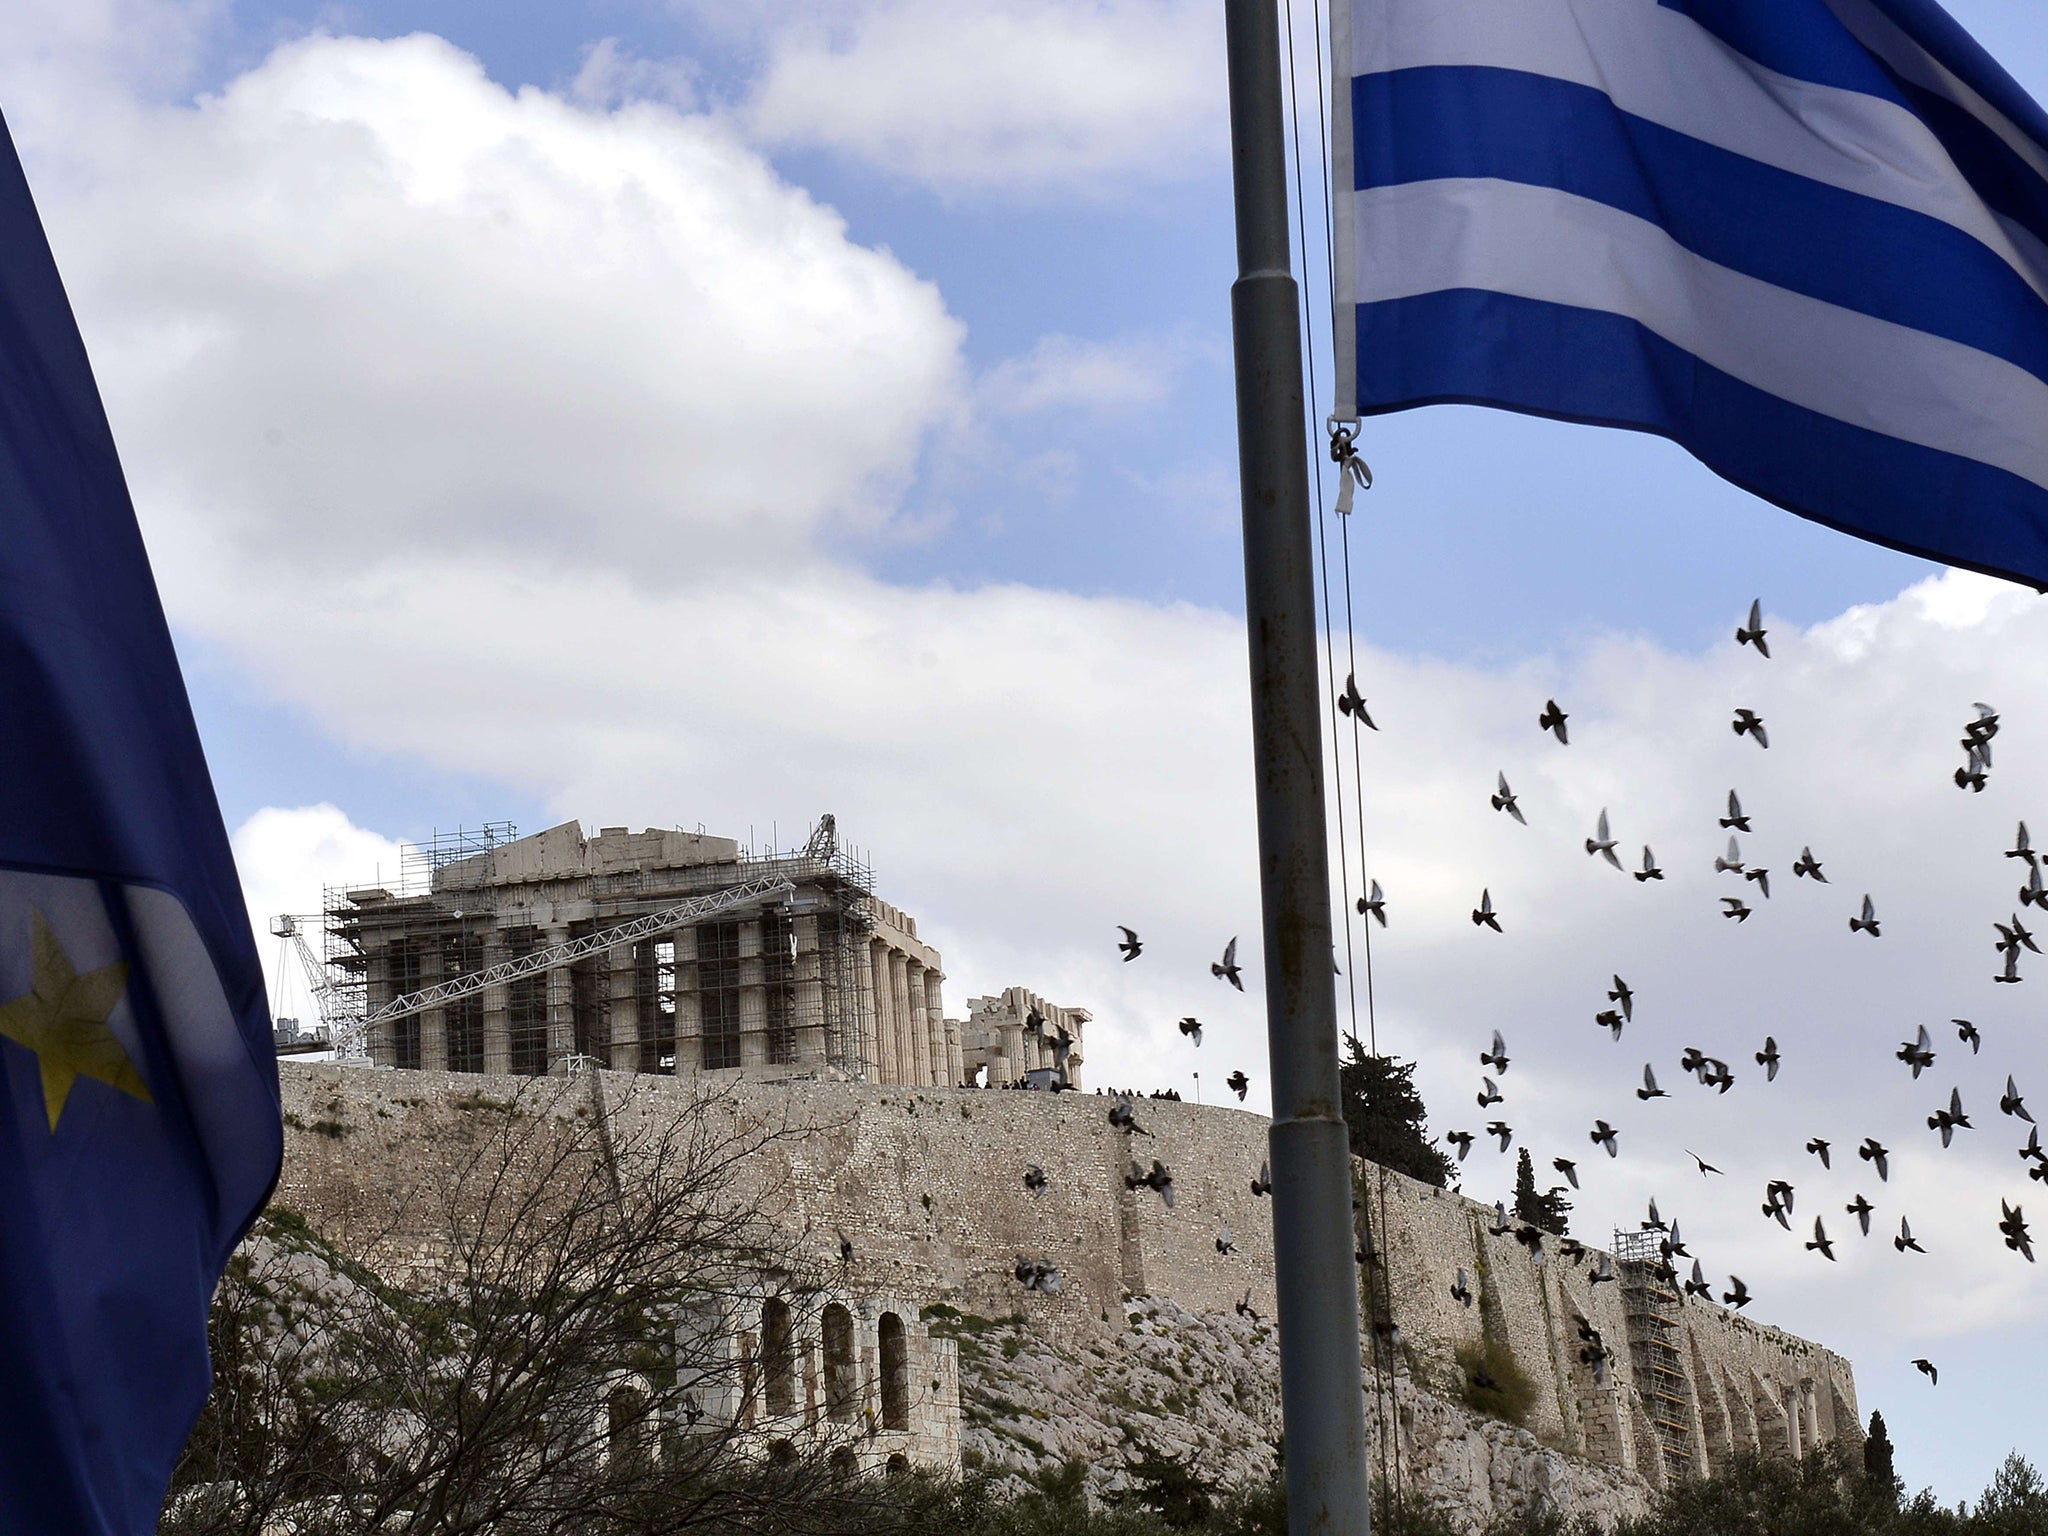 By insisting it keep on trying to pay its debts, some argue, Germany seems to be intent on punishing Greece